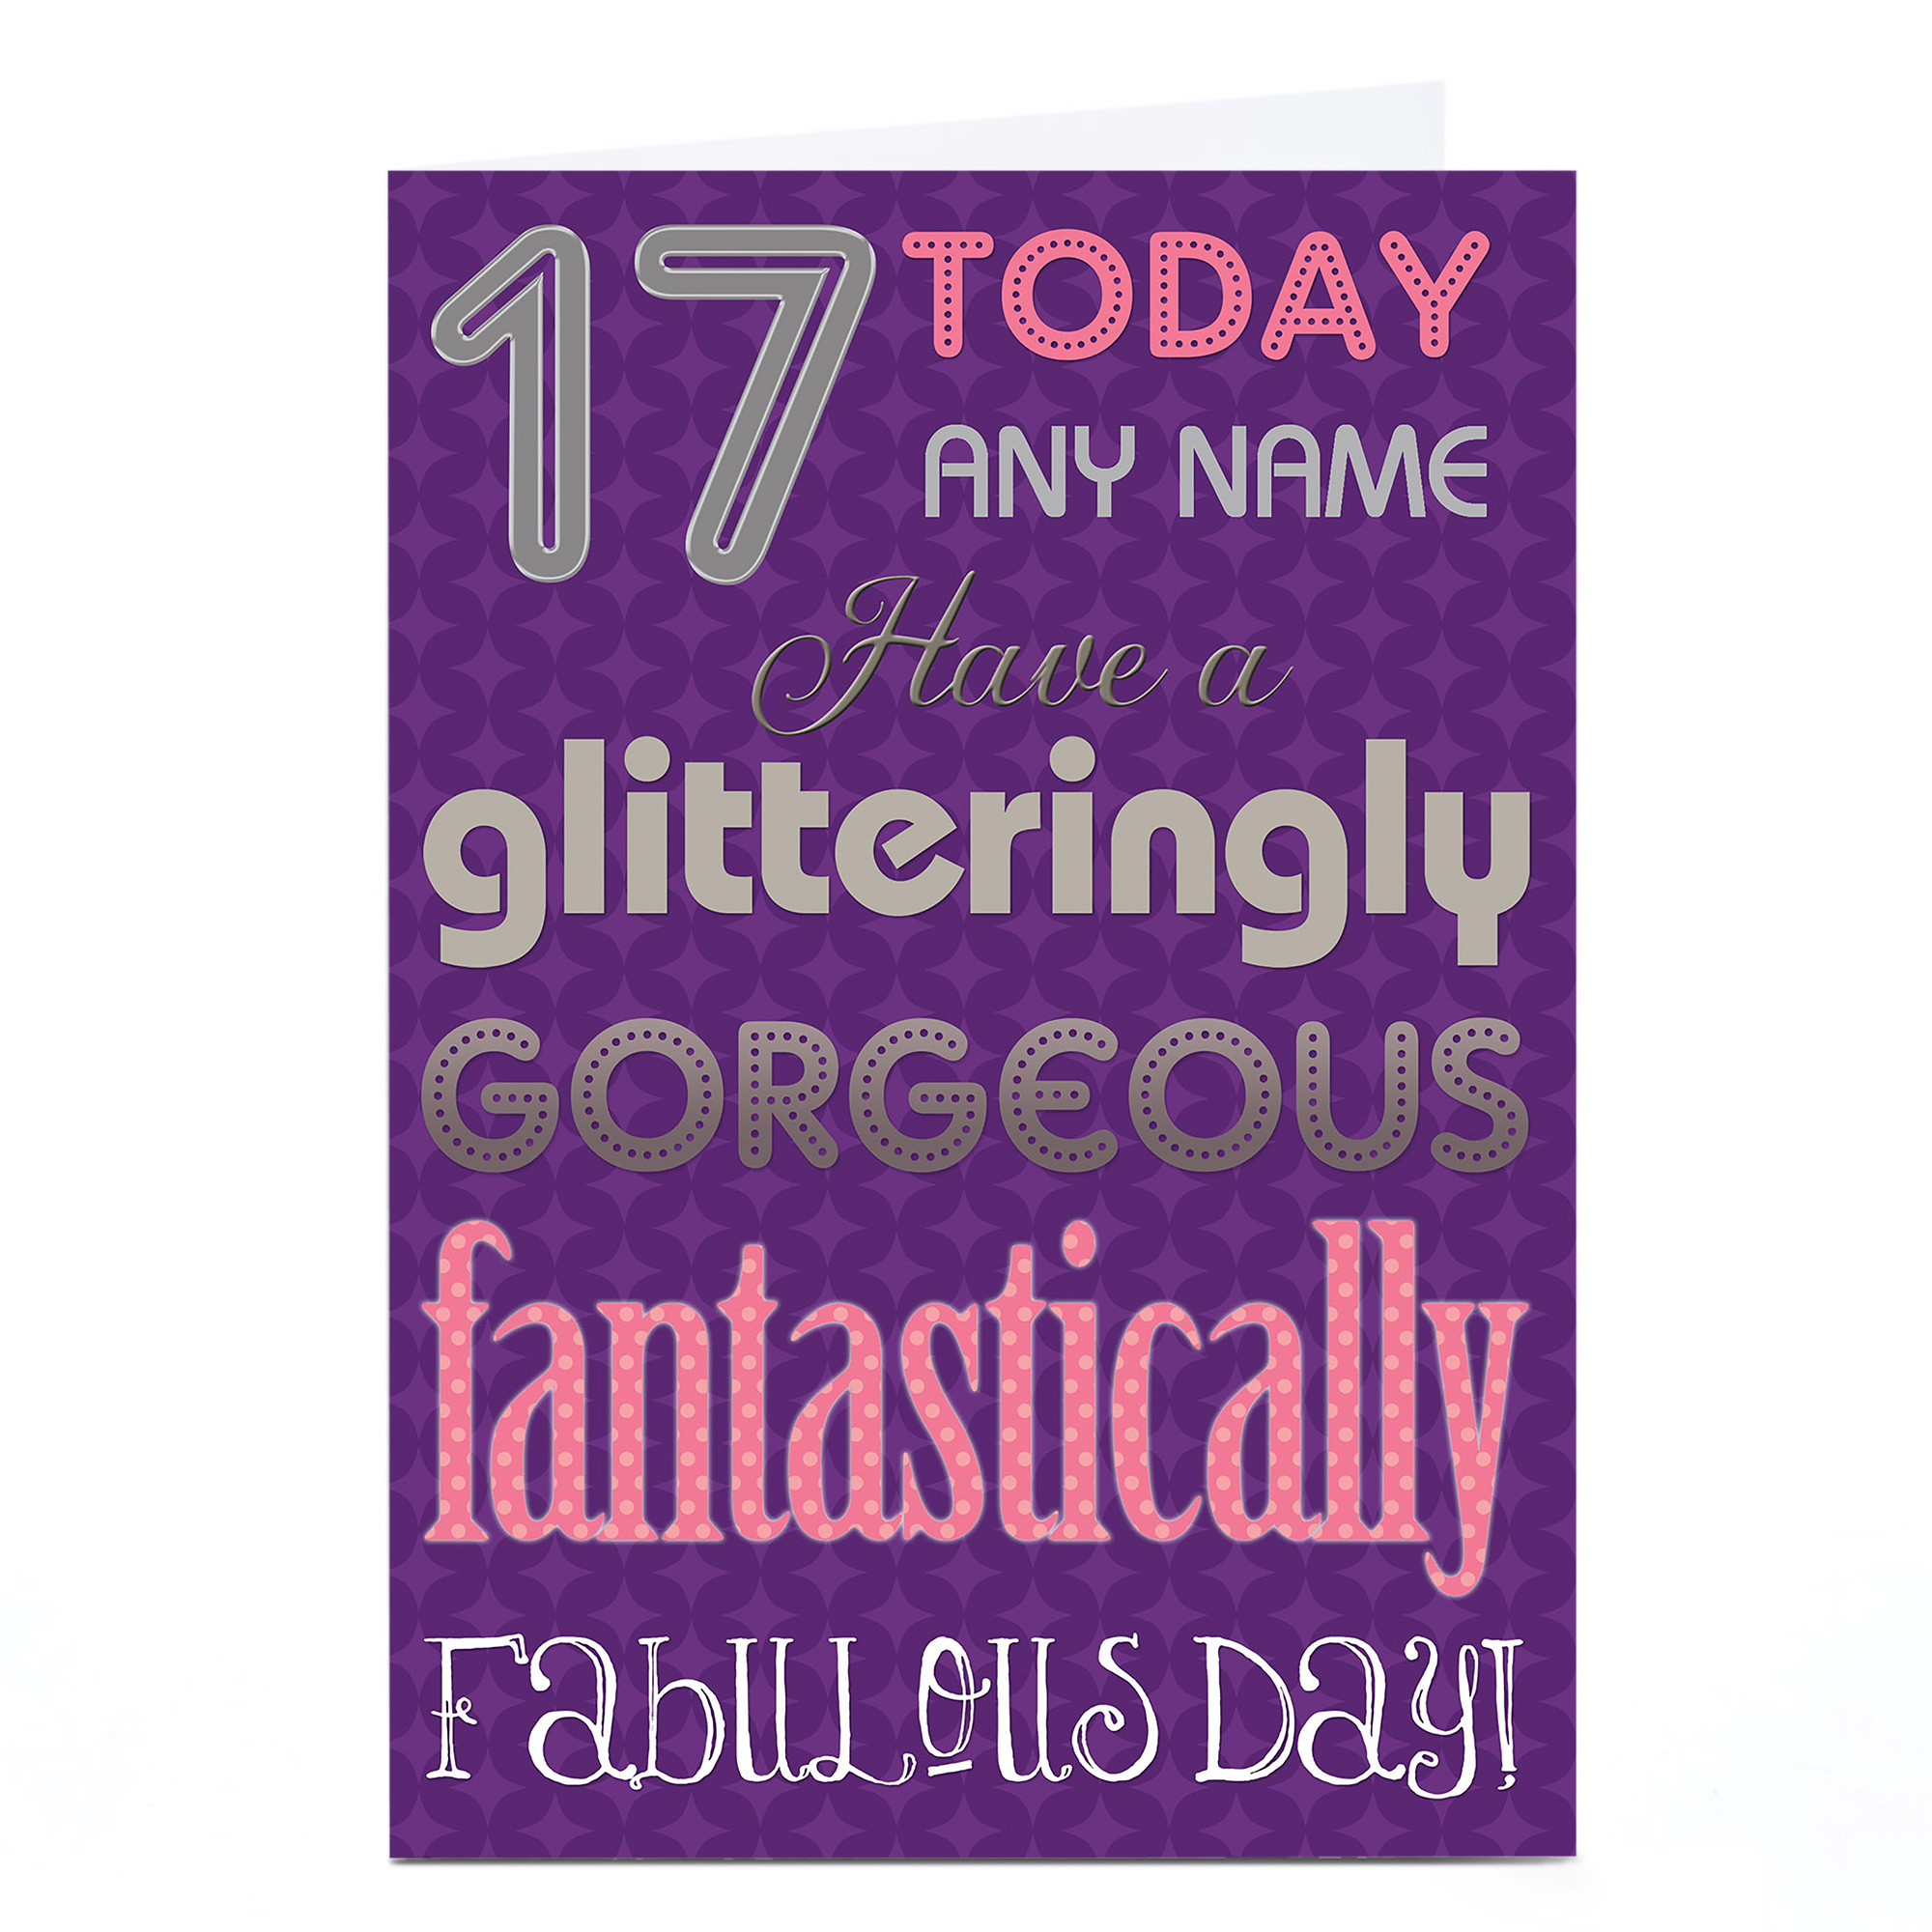 Personalised 17th Birthday Card - Glitteringly Gorgeous